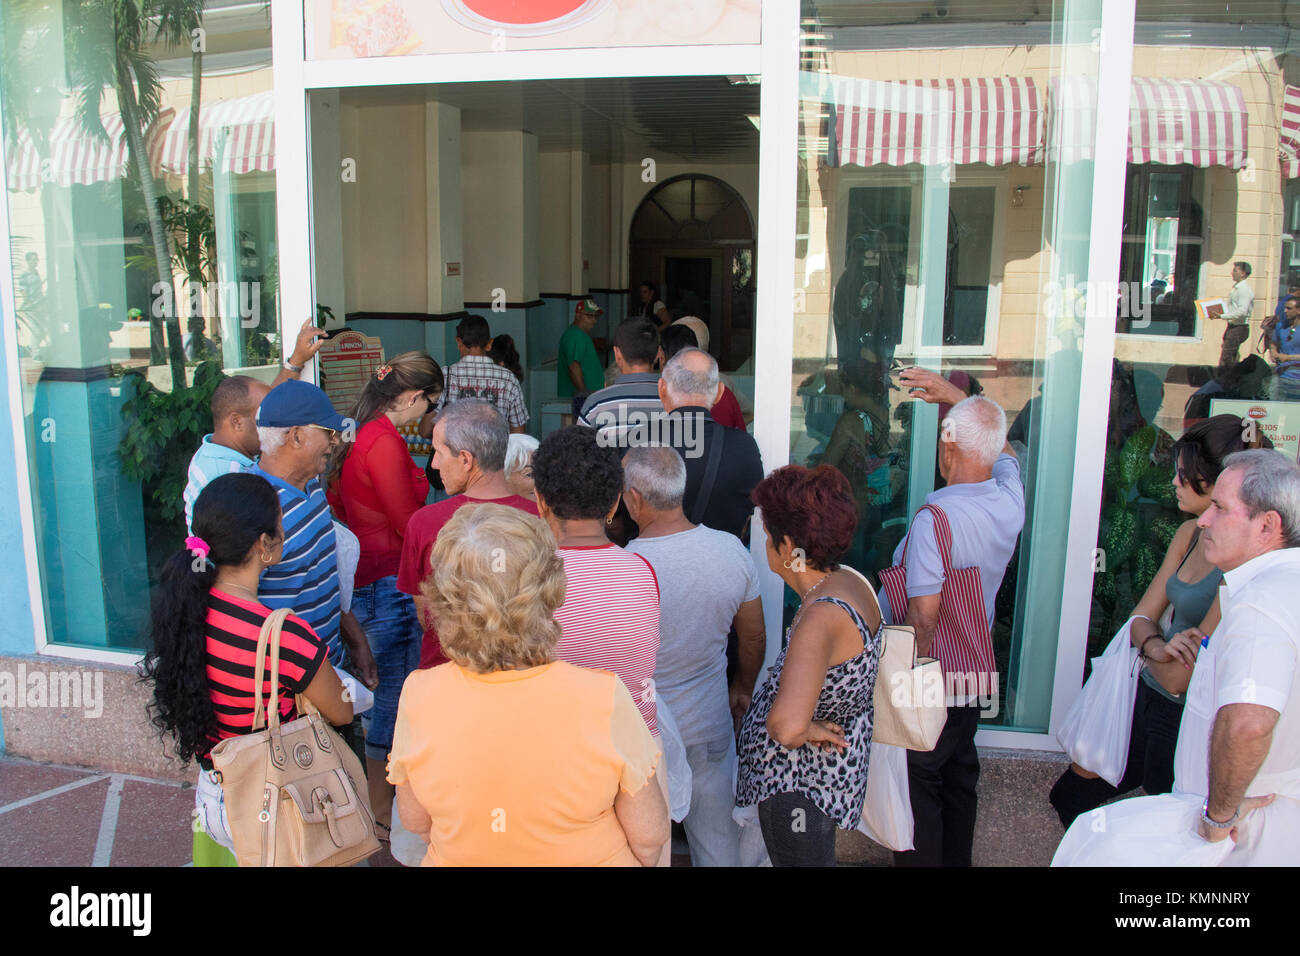 Waiting in line for a limited supply of eggs, Cienfuegos, Cuba Stock Photo